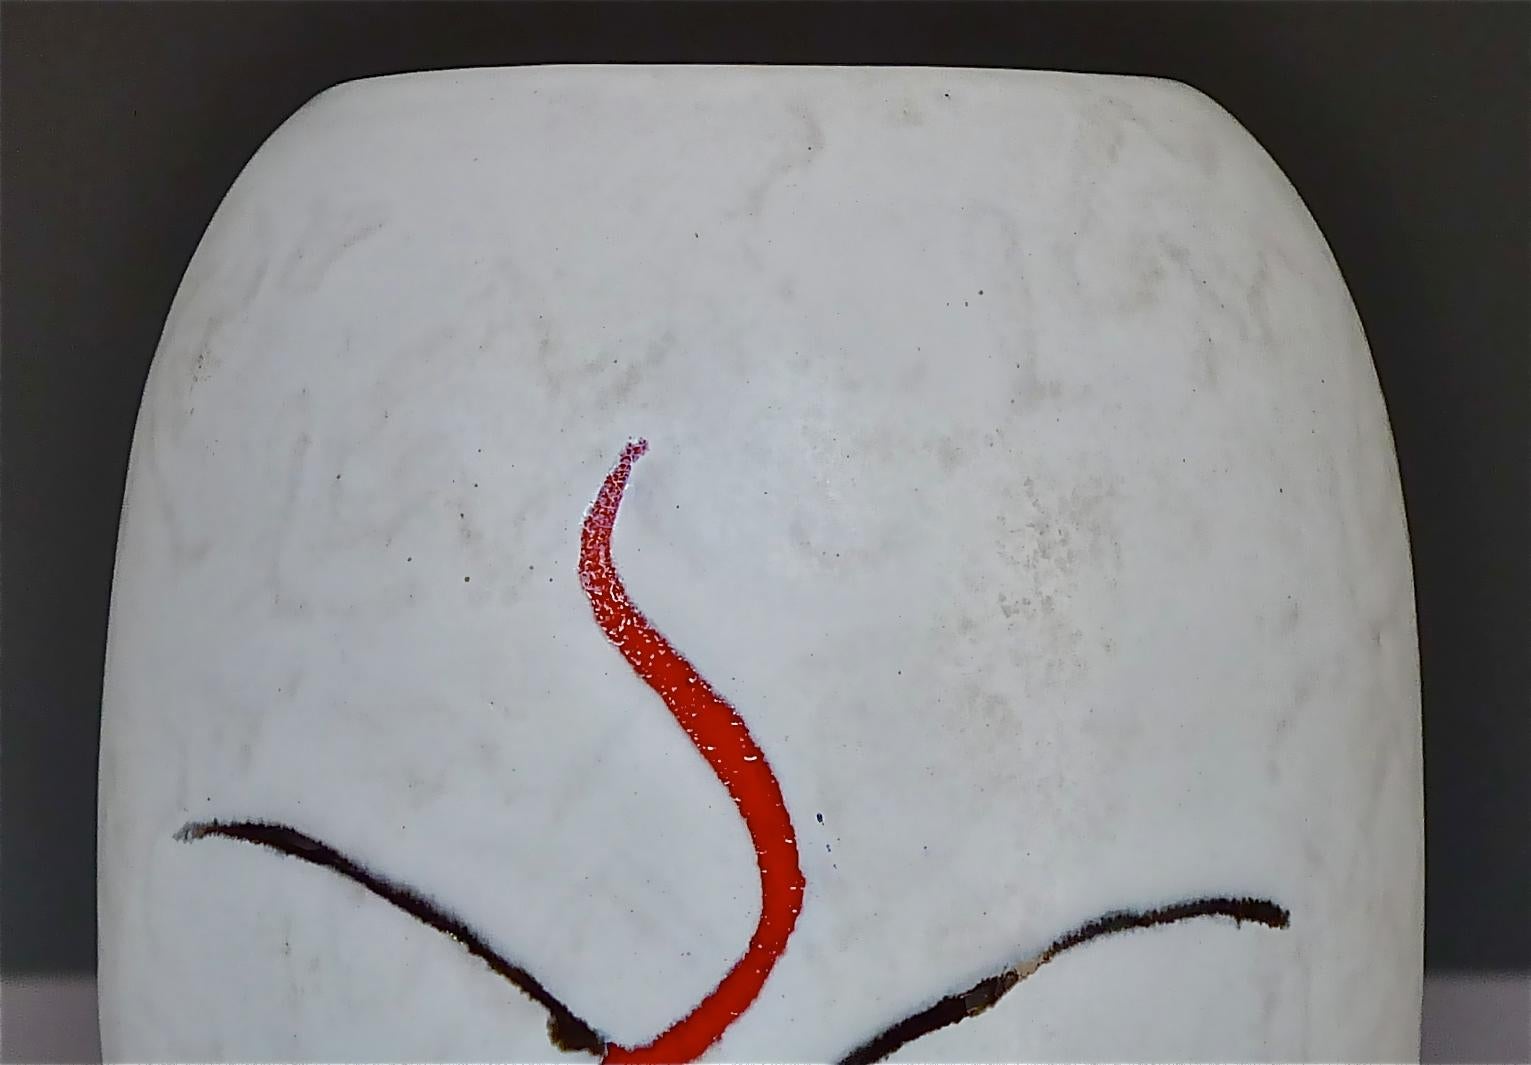 Mid-Century Modern Abstract Midcentury Art Ceramic Vase and Bowl Gambone Miro Style White Red 1950s For Sale